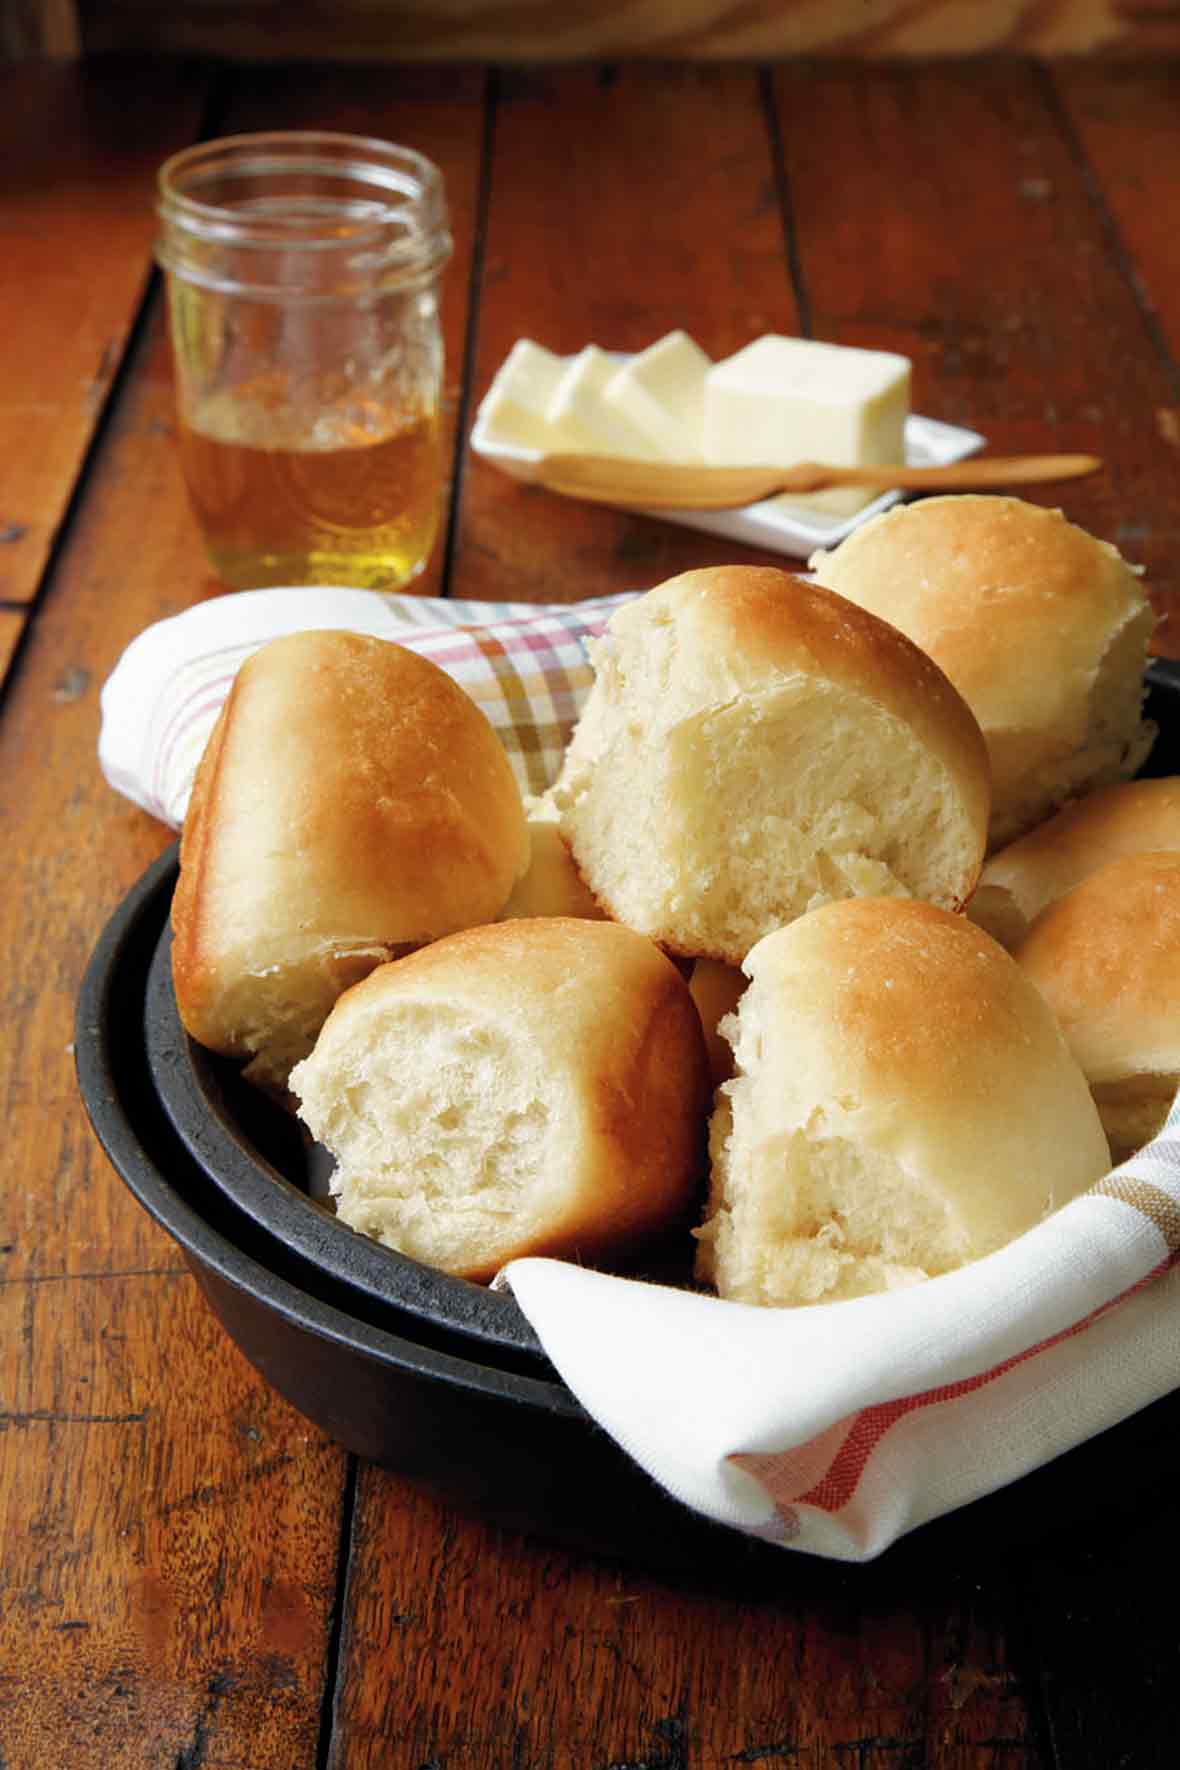 A bowl lined with a napkin and filled with pull-apart rolls